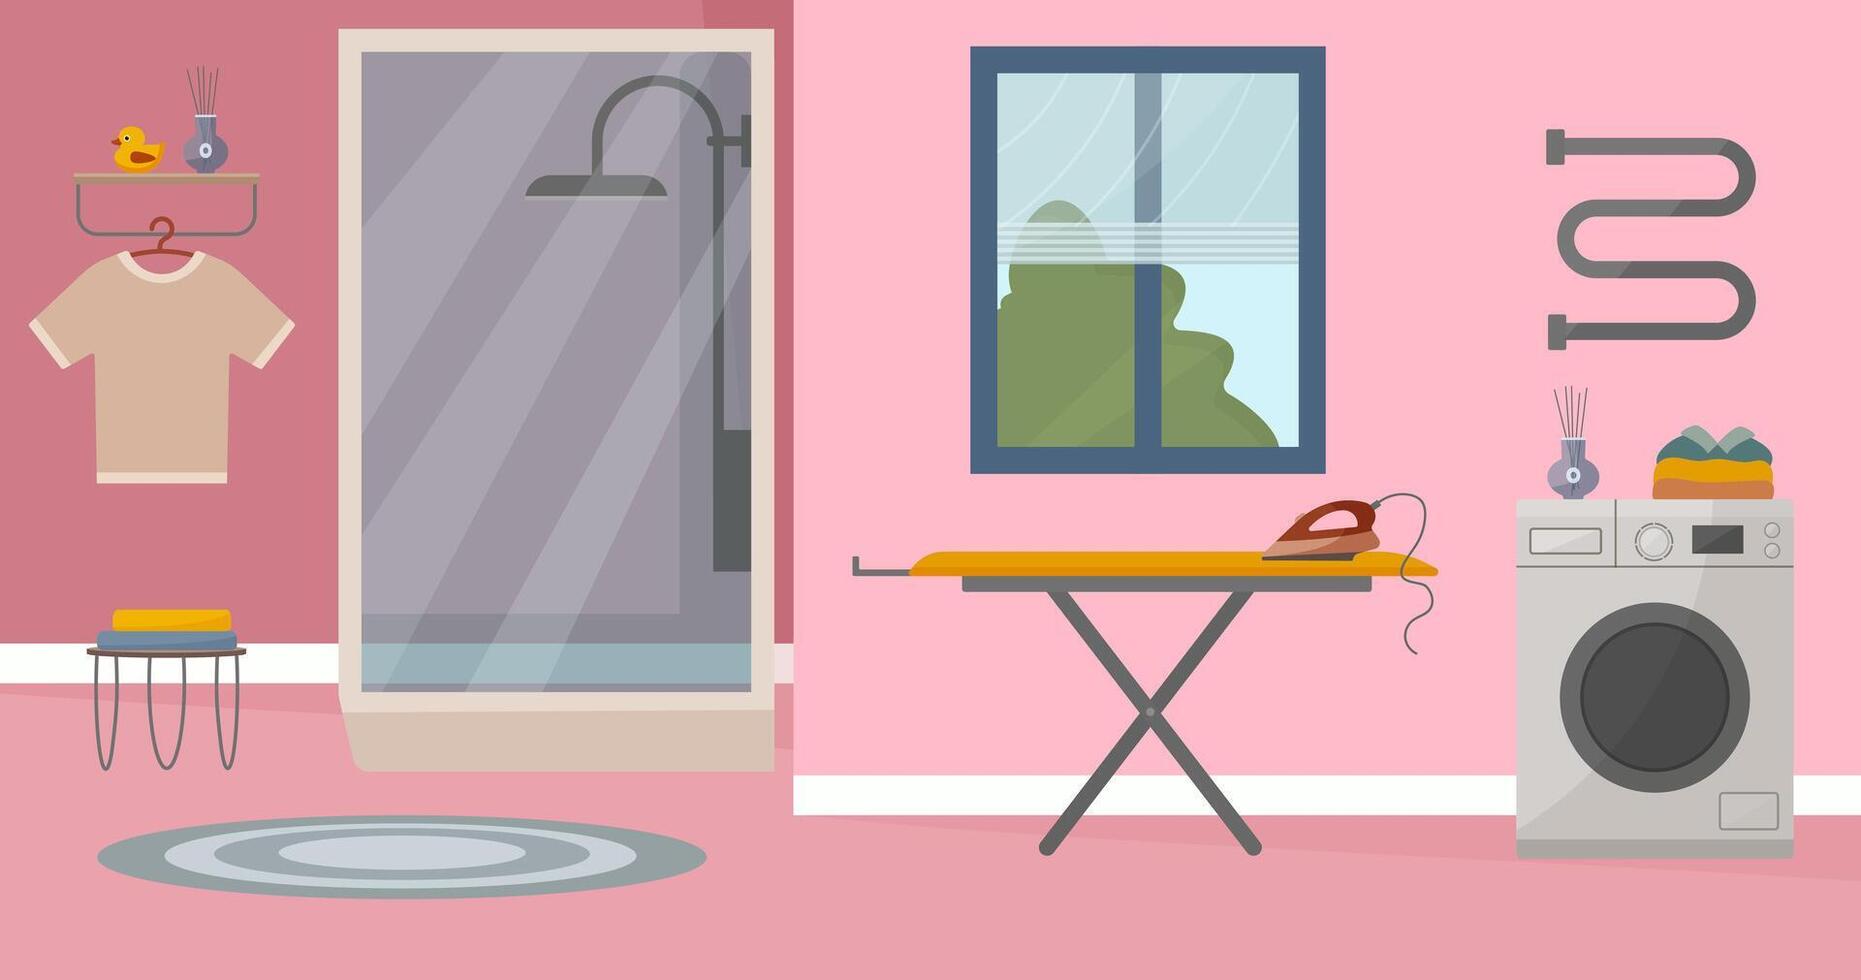 Bathroom interior, modern bathroom with shower, washing machine, ironing board and window. illustration in flat style. Interior concept. Home and interior decor. vector